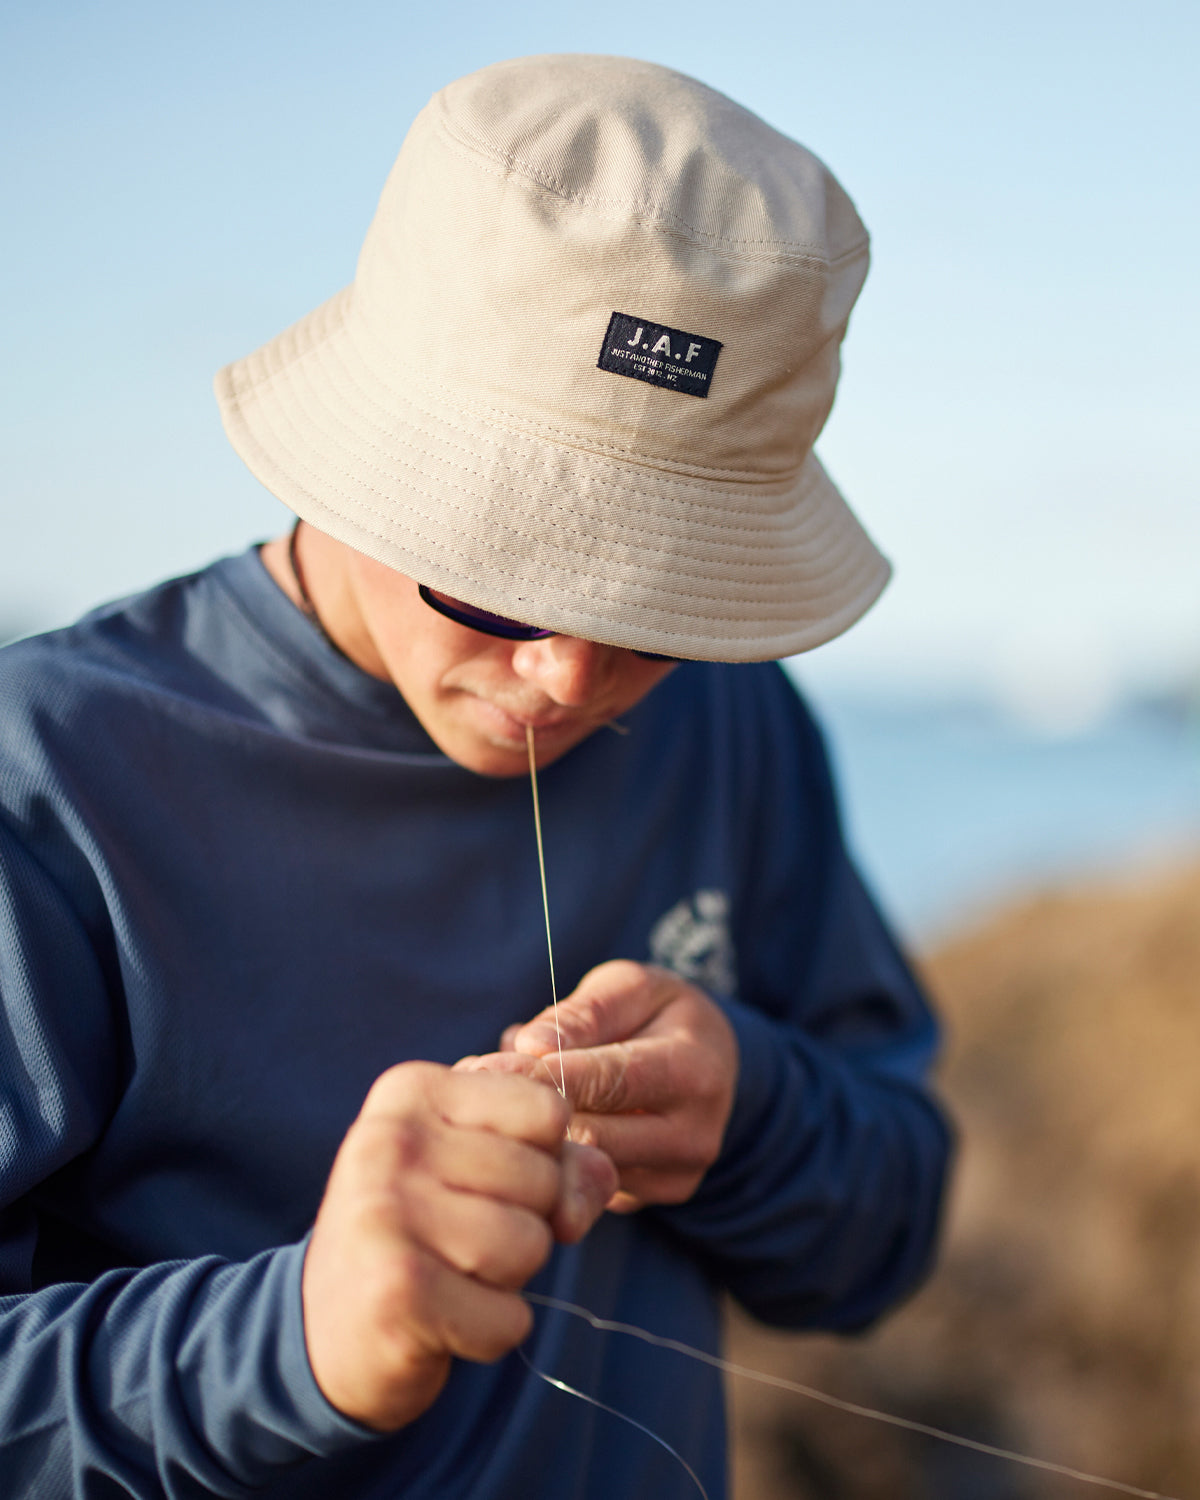 Just Another Fisherman Dawn till Dusk Bucket Hat - Natural